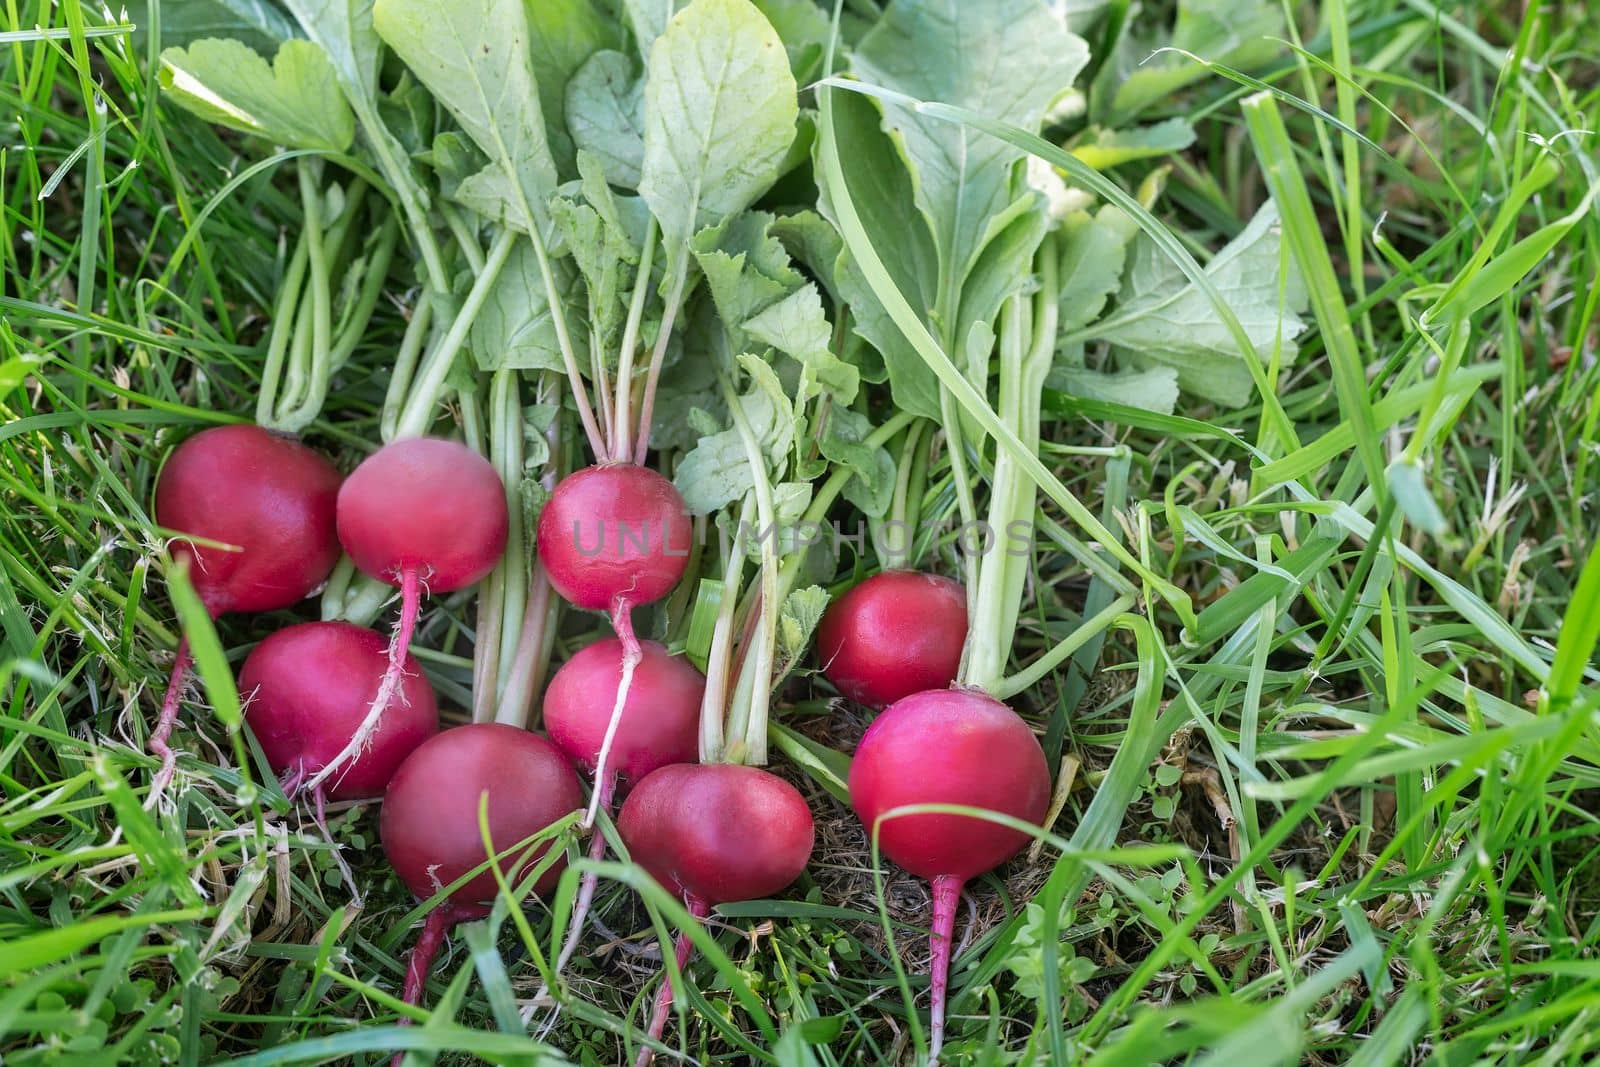 A bunch of fresh red radish with leaves on the green grass in the garden. Harvesting.